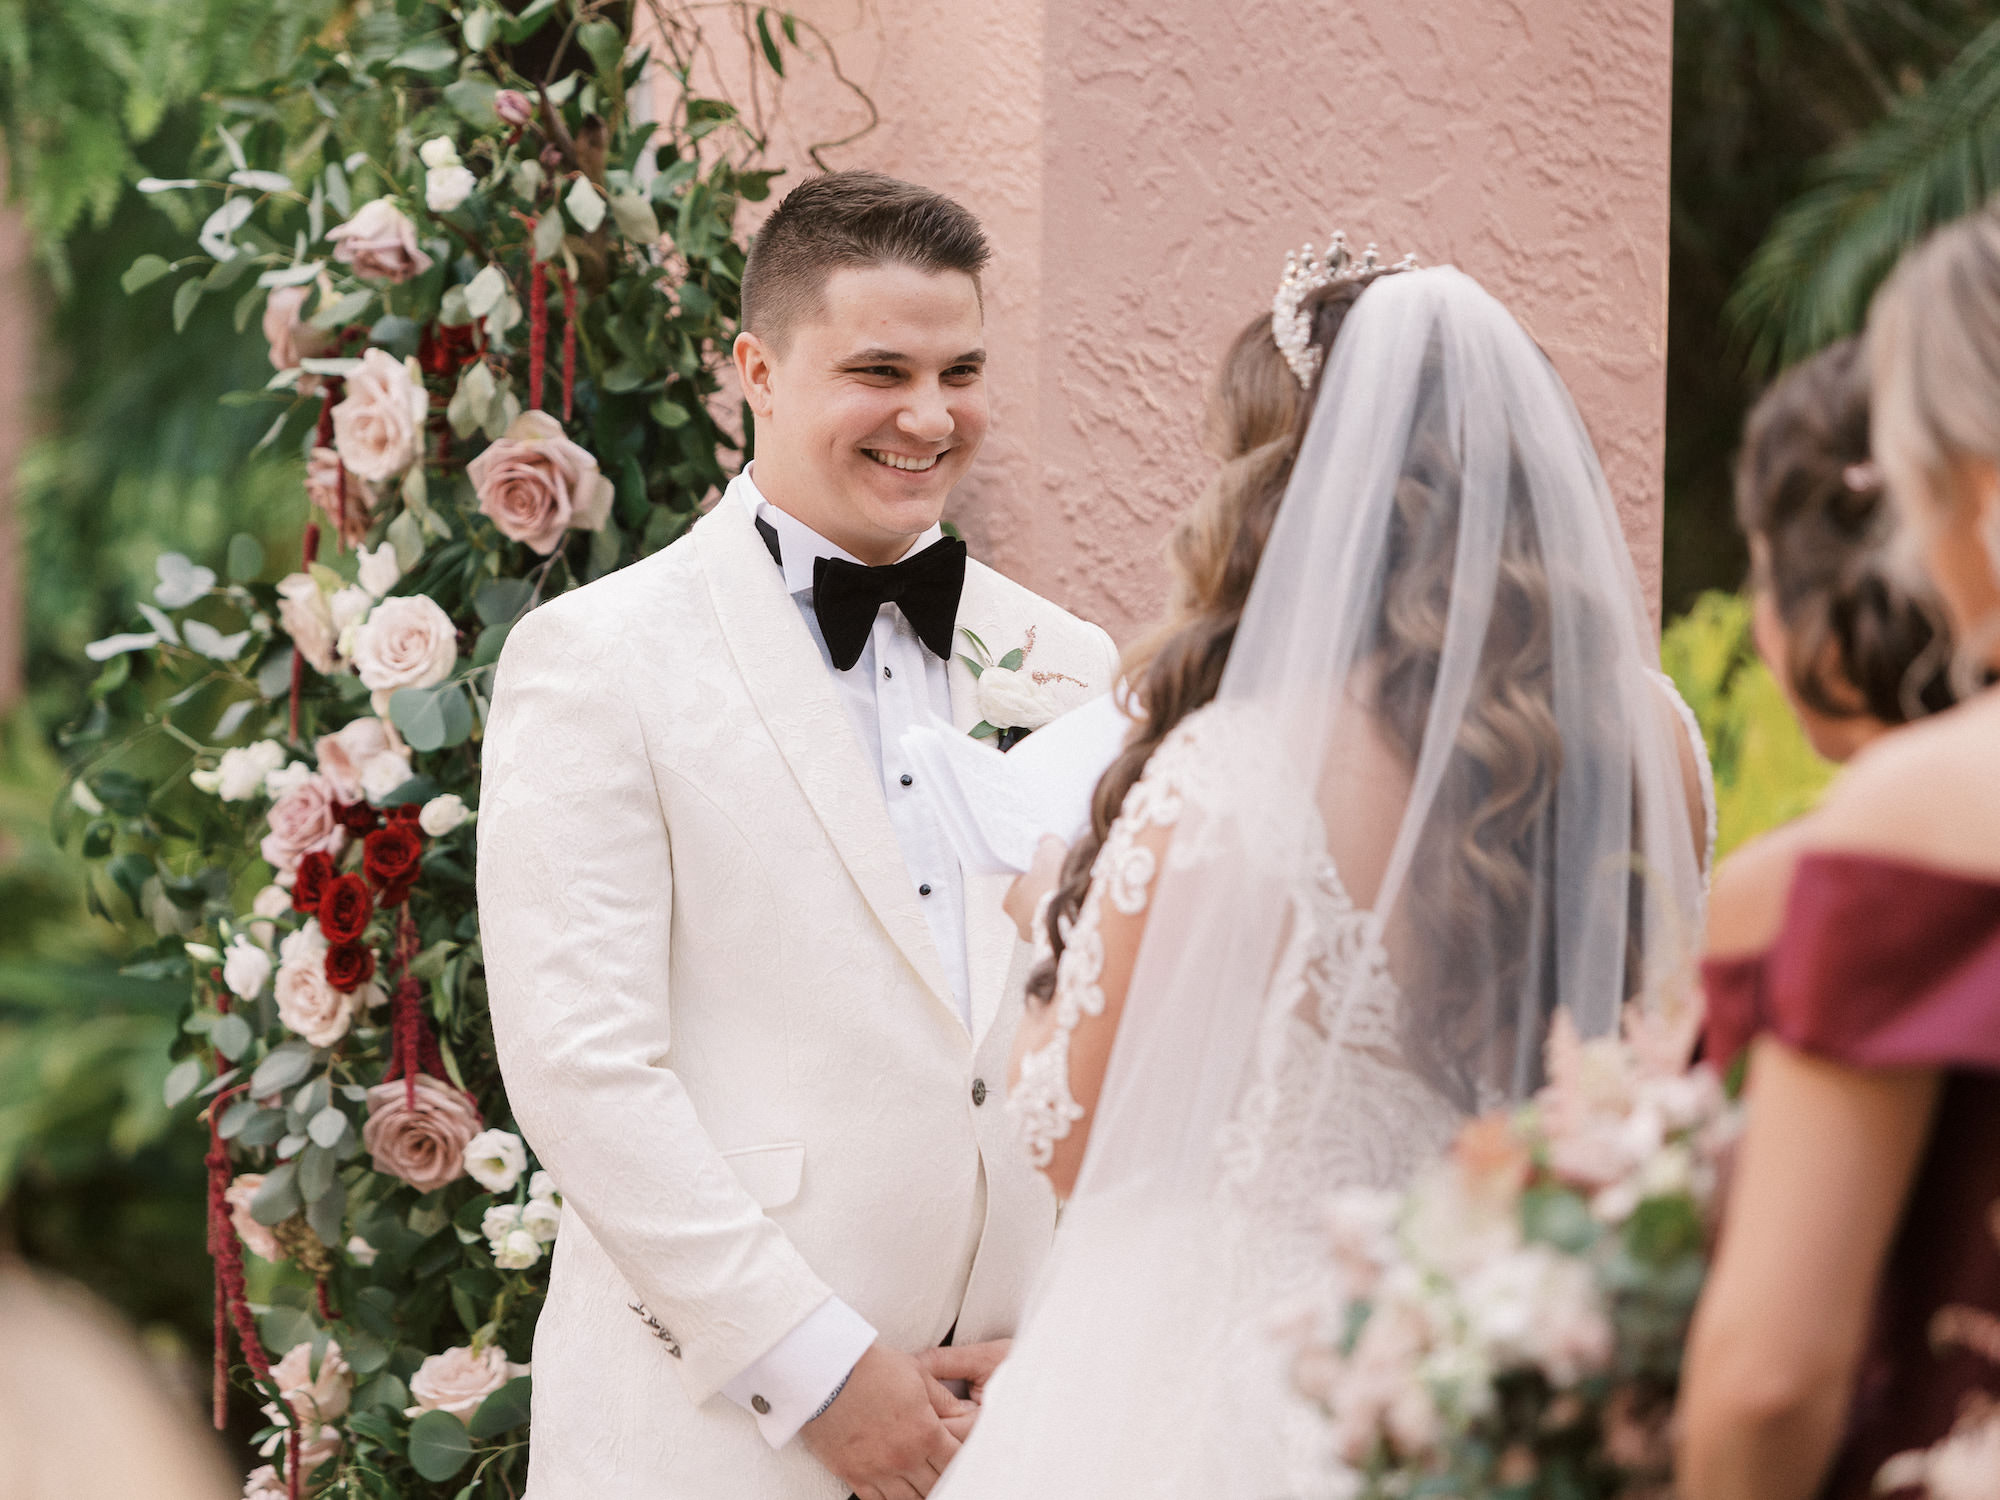 Emotionally Happy Groom Wearing White Tuxedo Jacket Looking at Bride During Wedding Ceremony Vow Exchange